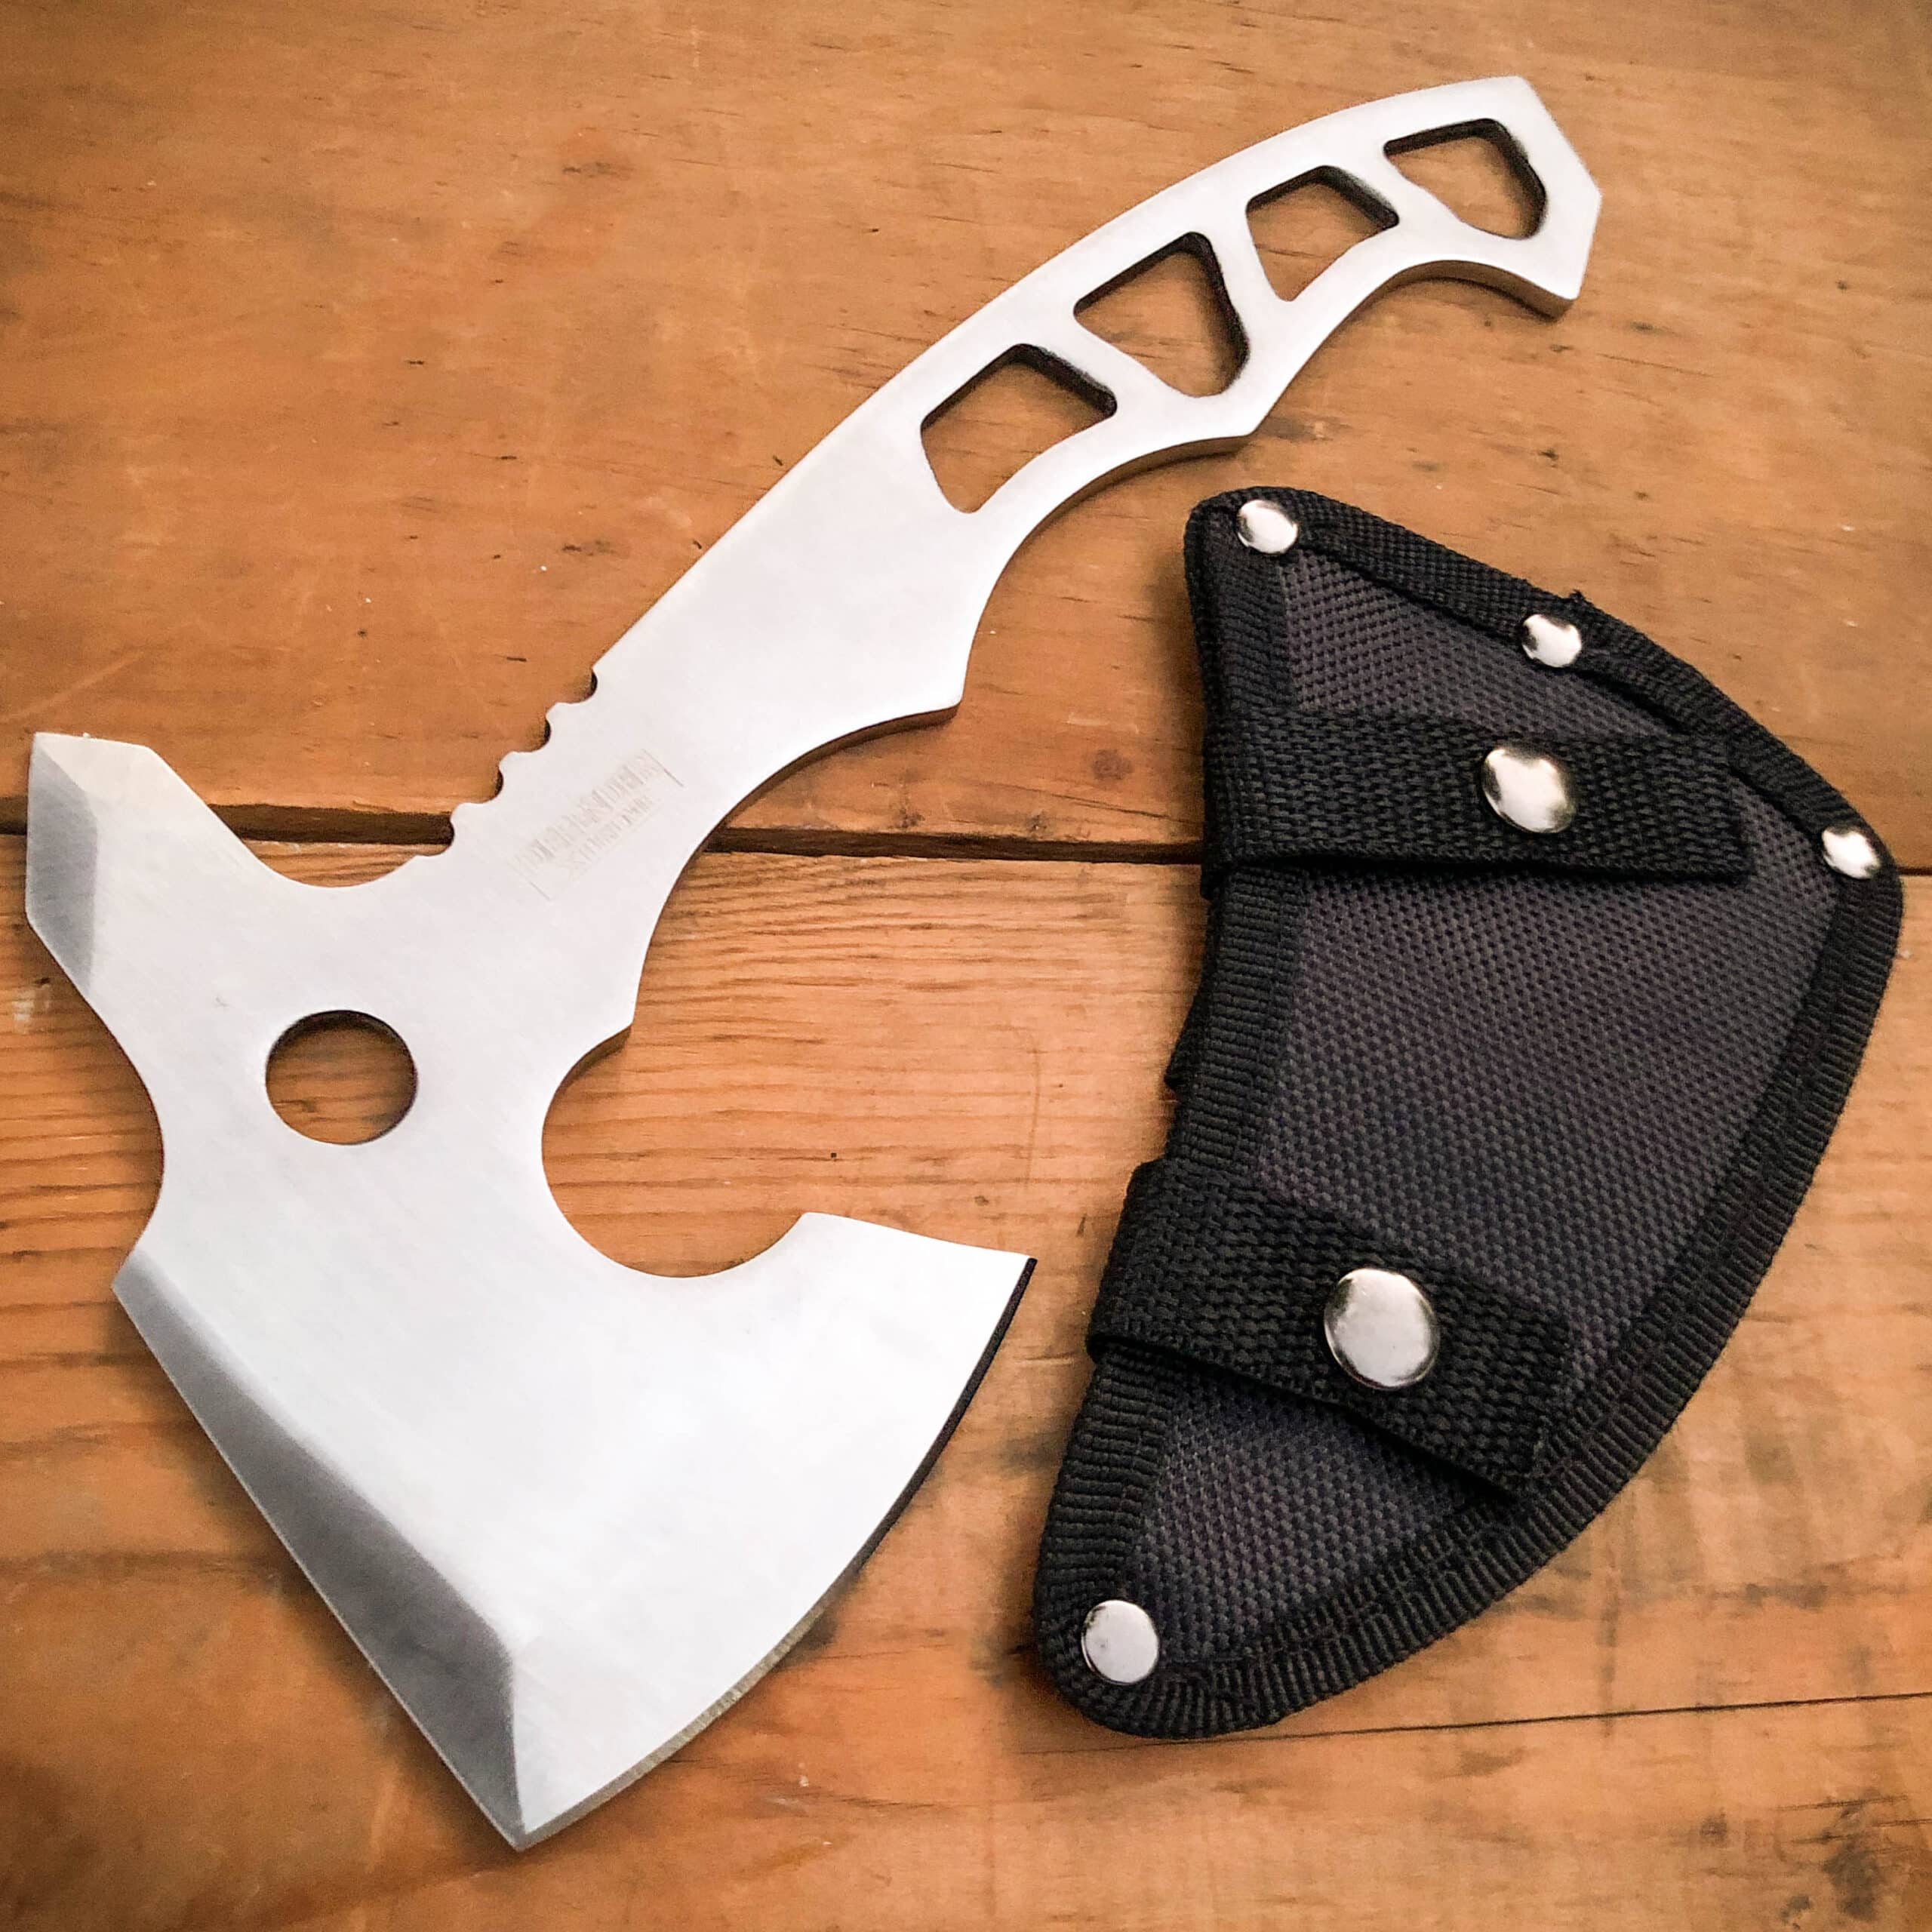 10″ Stainless Steel Full Tang Tomahawk Throwing Axe Hatchet Hiking Camping Knife